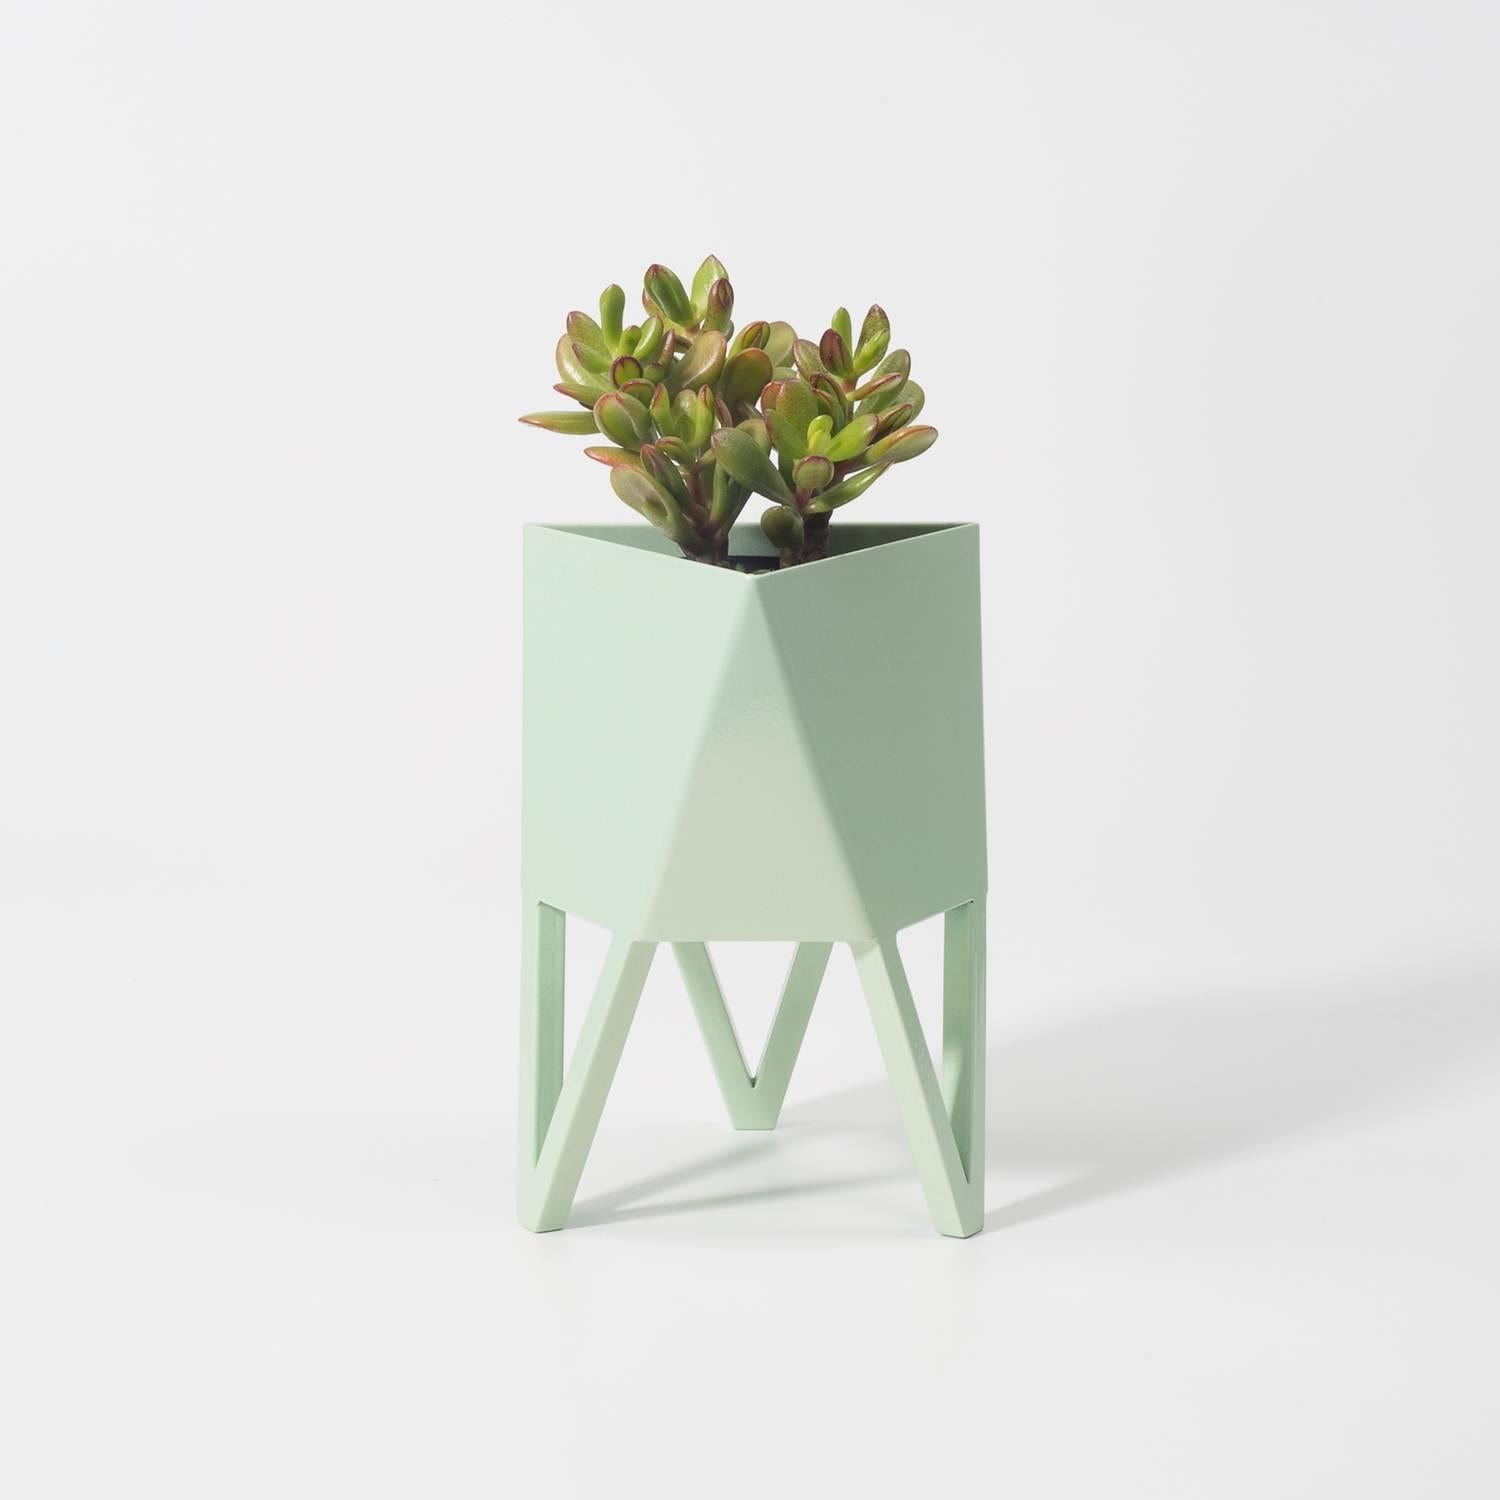 Introducing Force/Collide's signature planter in flat pastel green. Using a seamless brake-forming technique, one sheet of steel is wrapped into a unique geometric pattern that's triangular at the top and hexagonal at the base. Three V-shaped legs